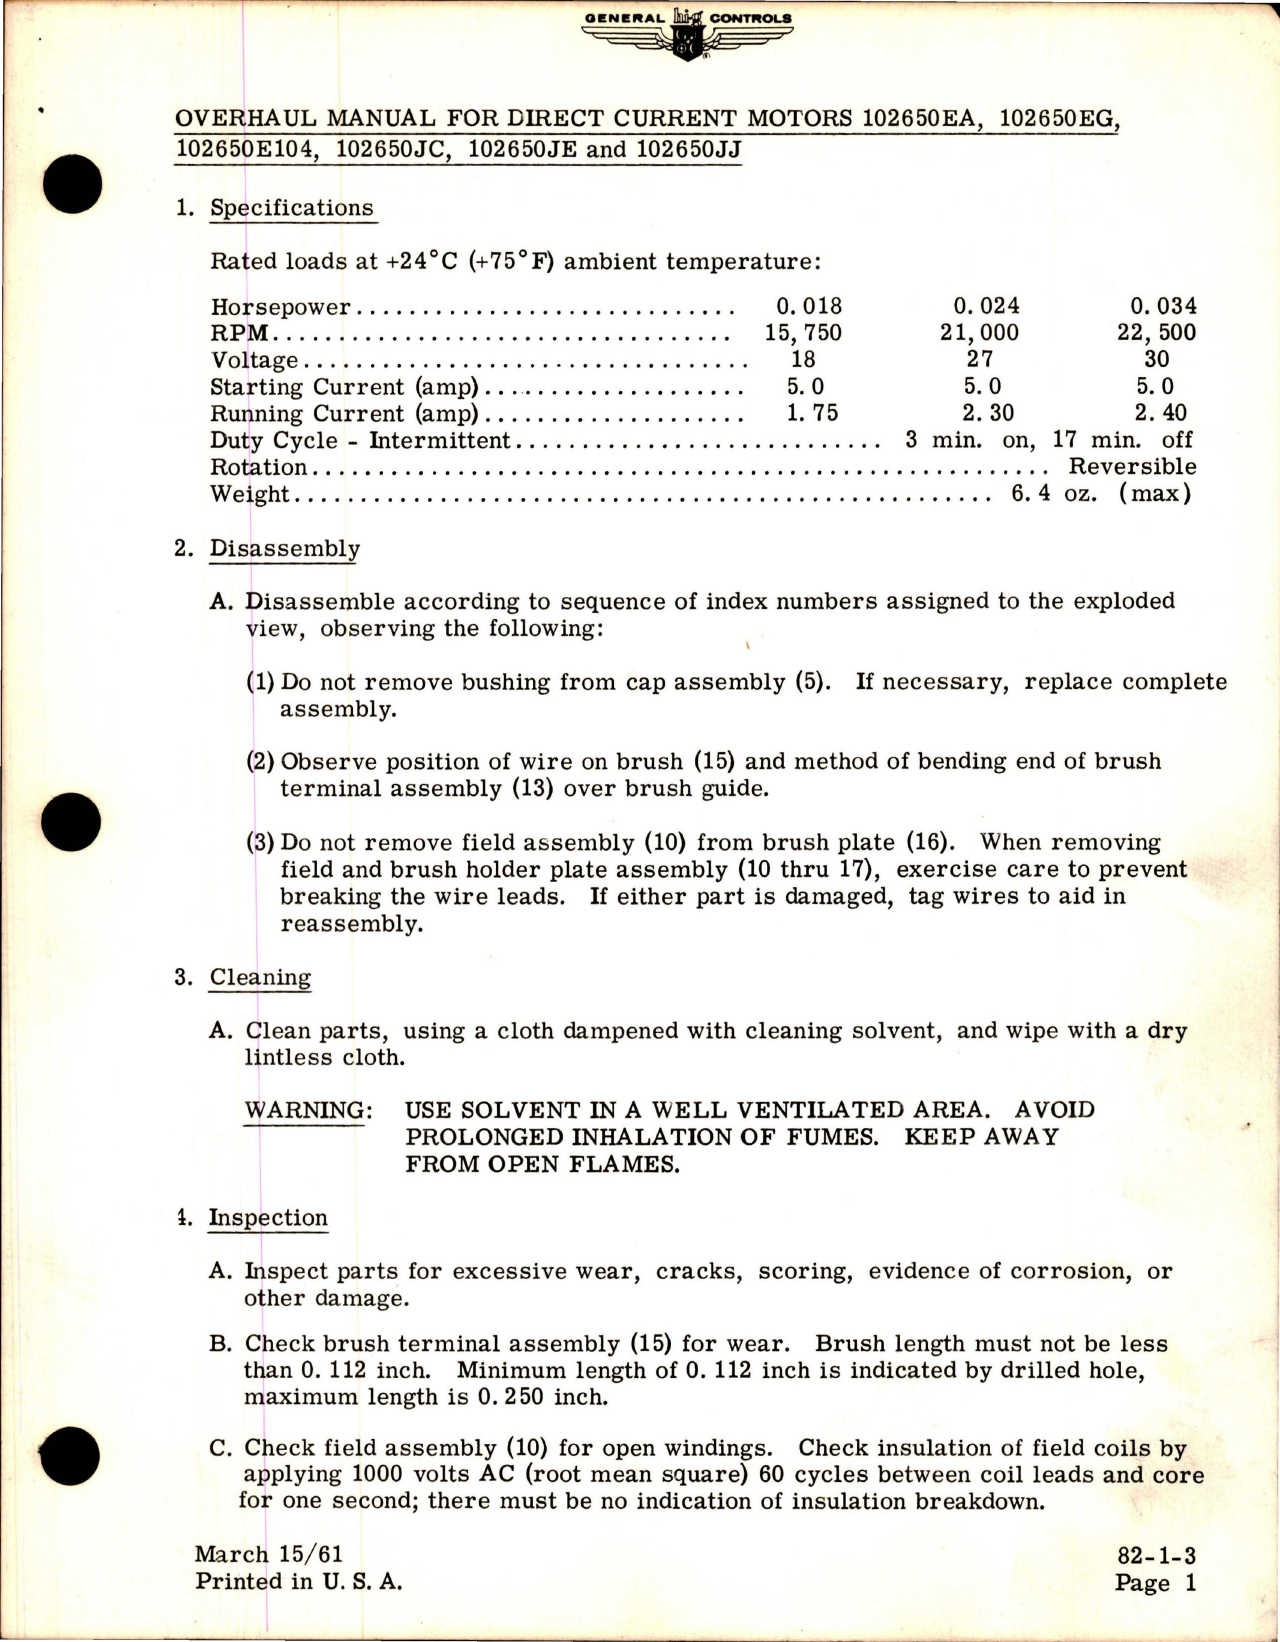 Sample page 1 from AirCorps Library document: Overhaul Manual for Direct Current Motors 